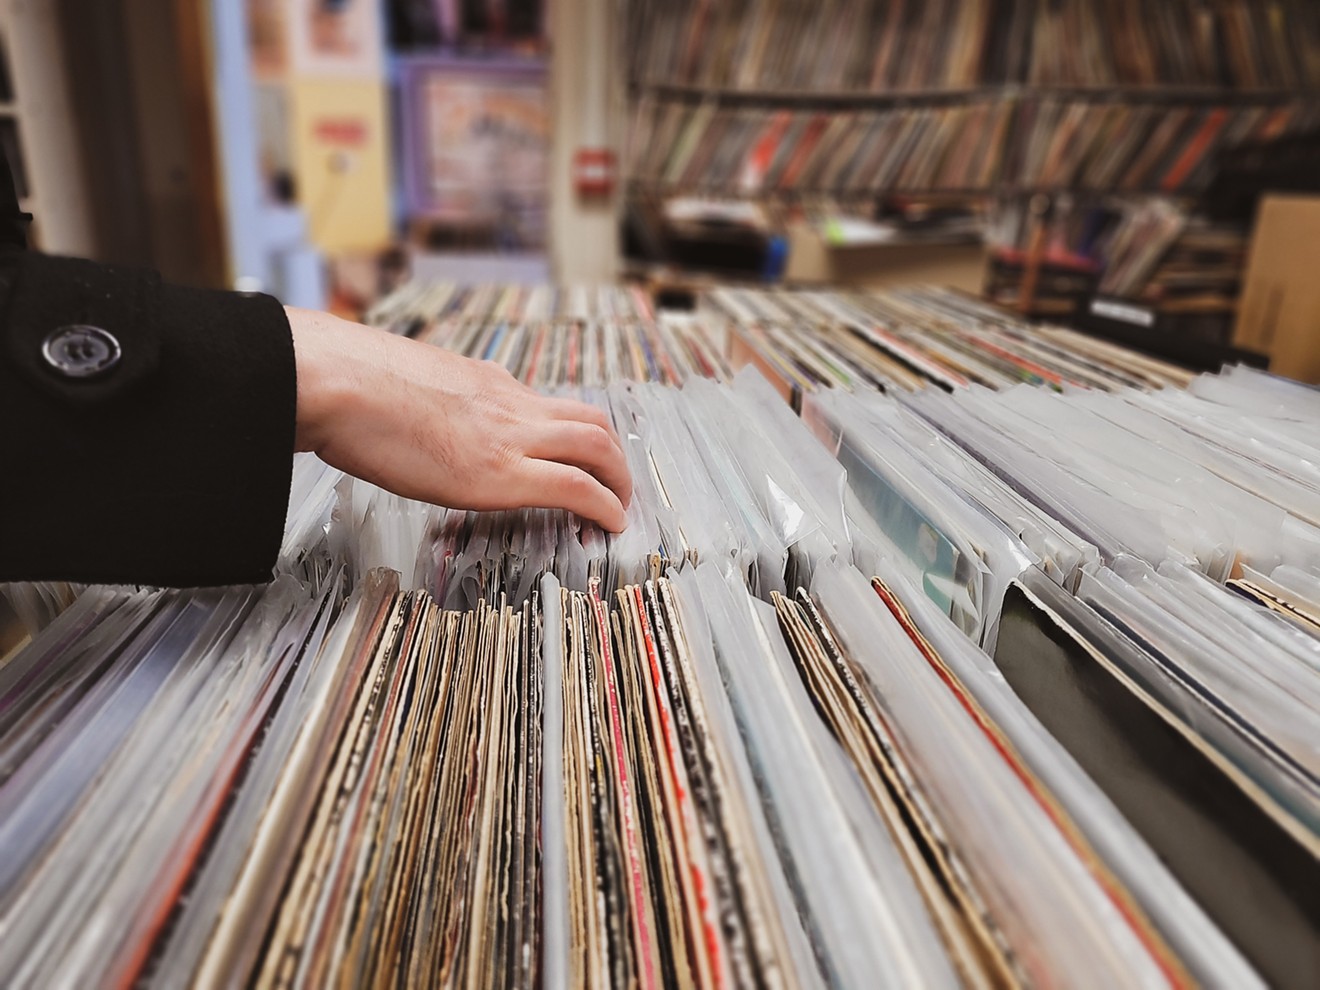 Record Store Day is almost here, so limber up your fingers for some serious vinyl browsing.